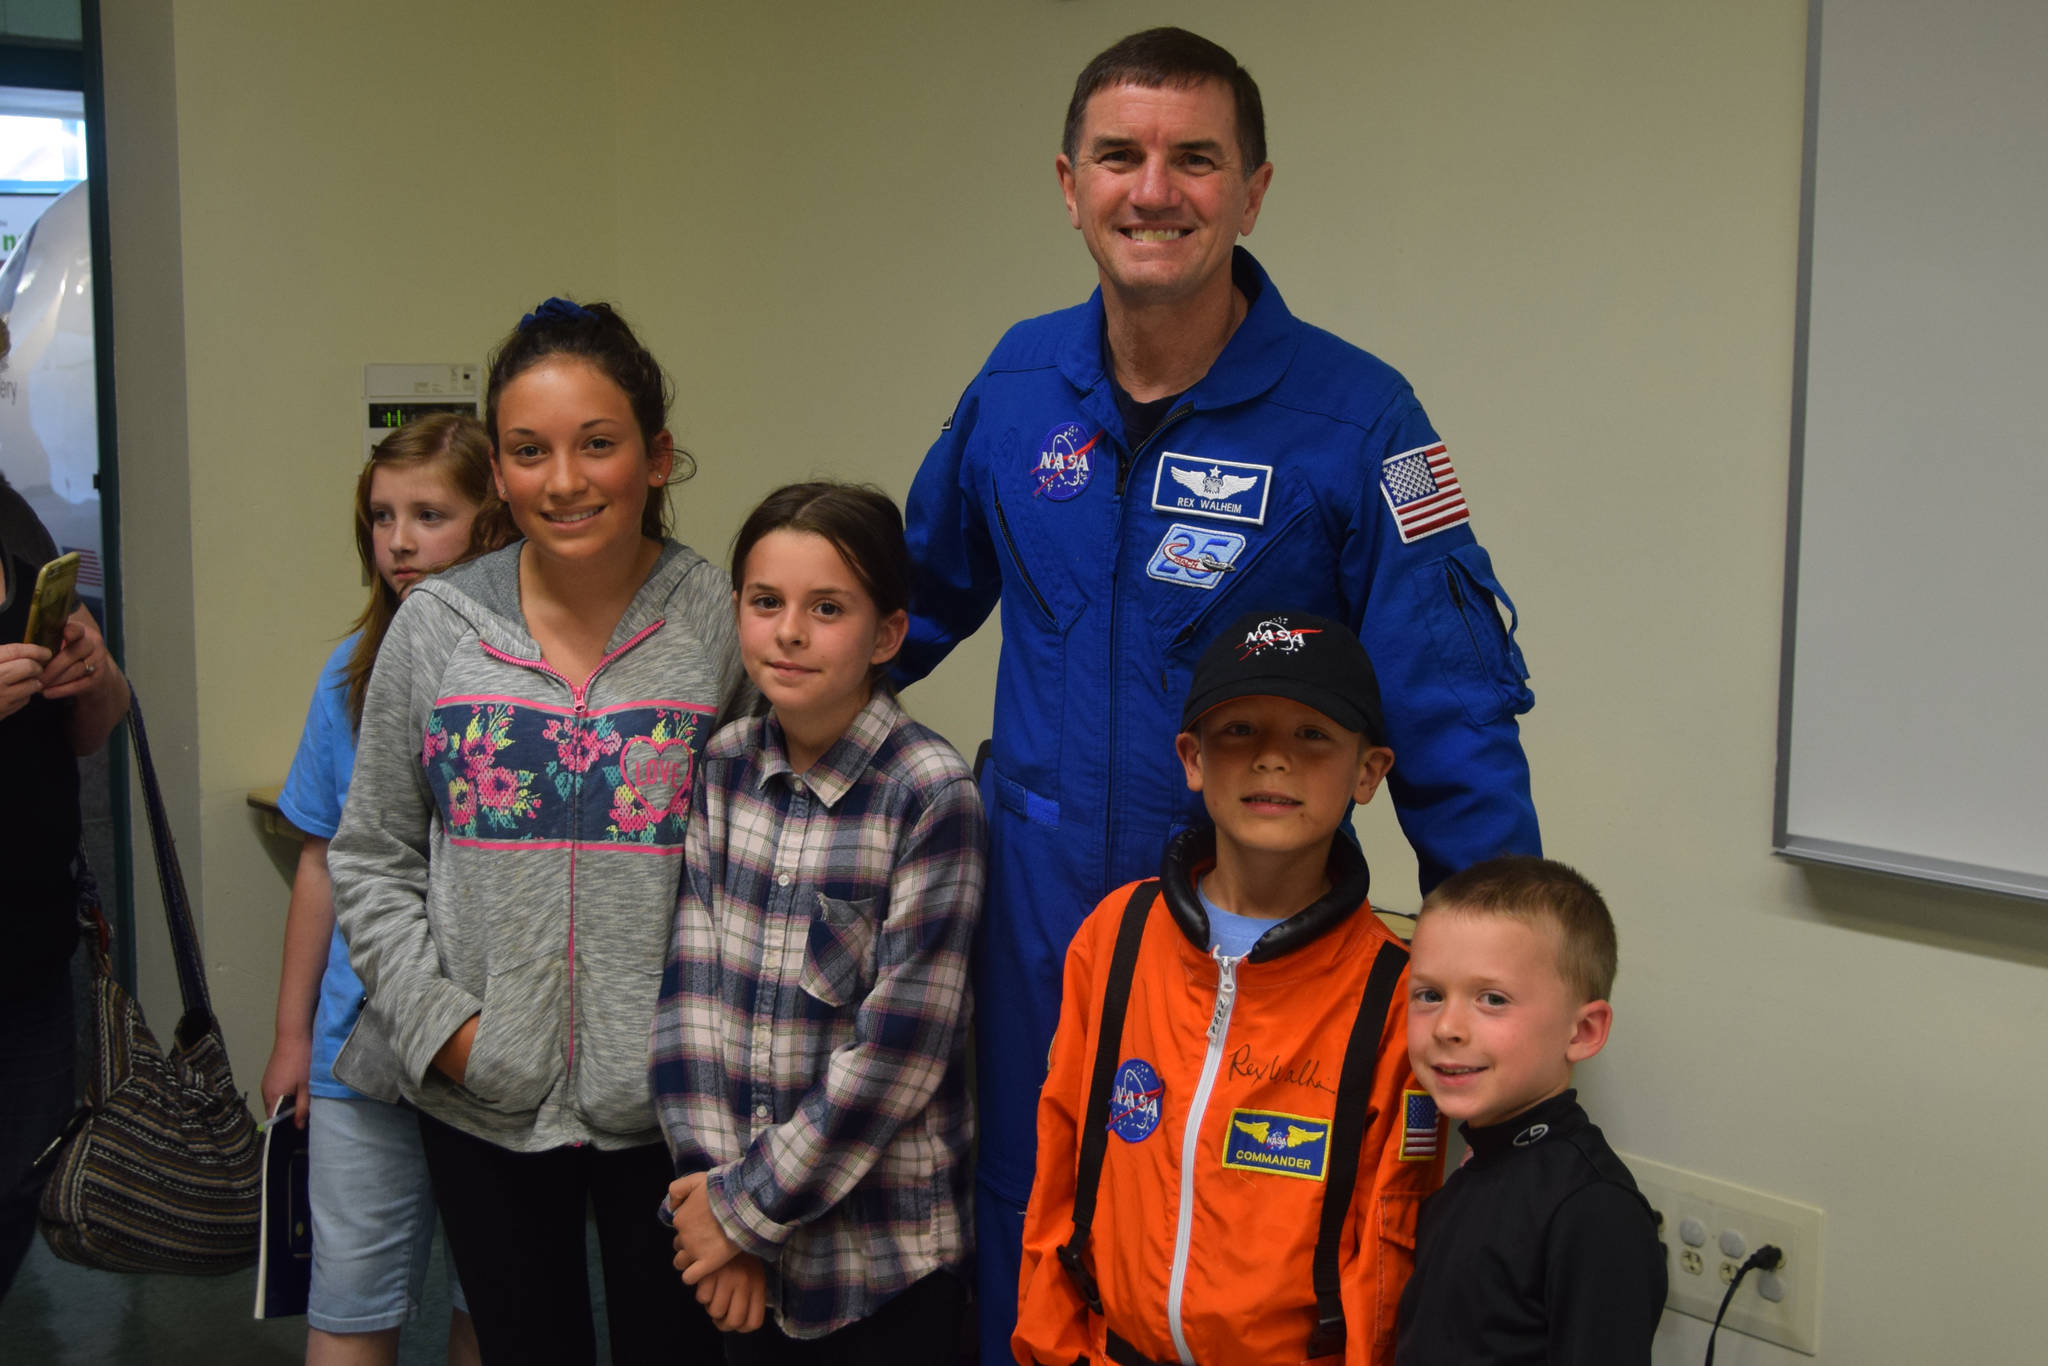 Astronaut Rex Walheim takes a photo with Sadie Doss, Ruby Doss, Silas Doss and Eli Doss at the Challenger Learning Center in Kenai, Alaska on Aug. 1, 2019. (Photo by Brian Mazurek/Peninsula Clarion)